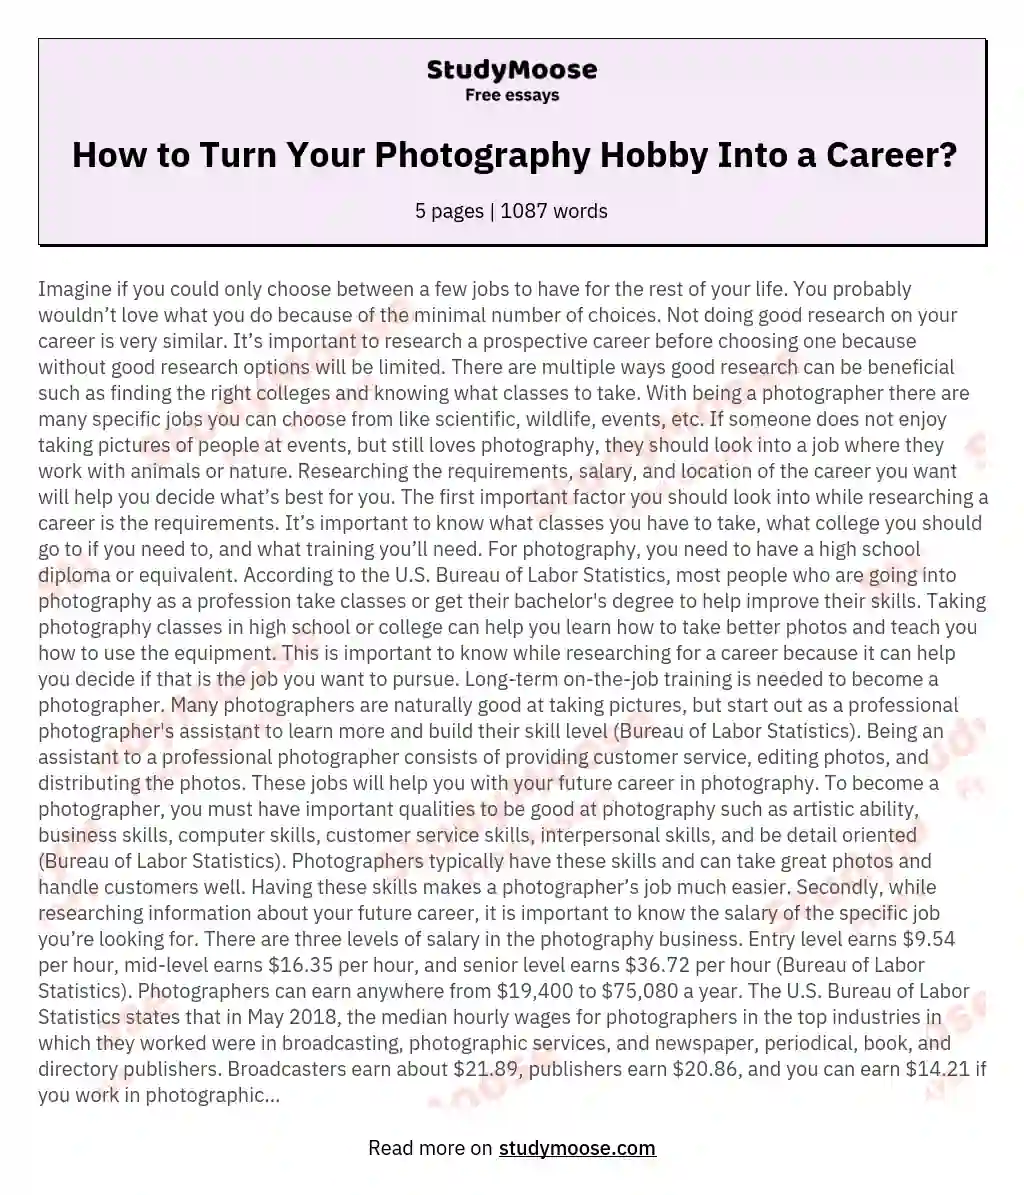 How to Turn Your Photography Hobby Into a Career?